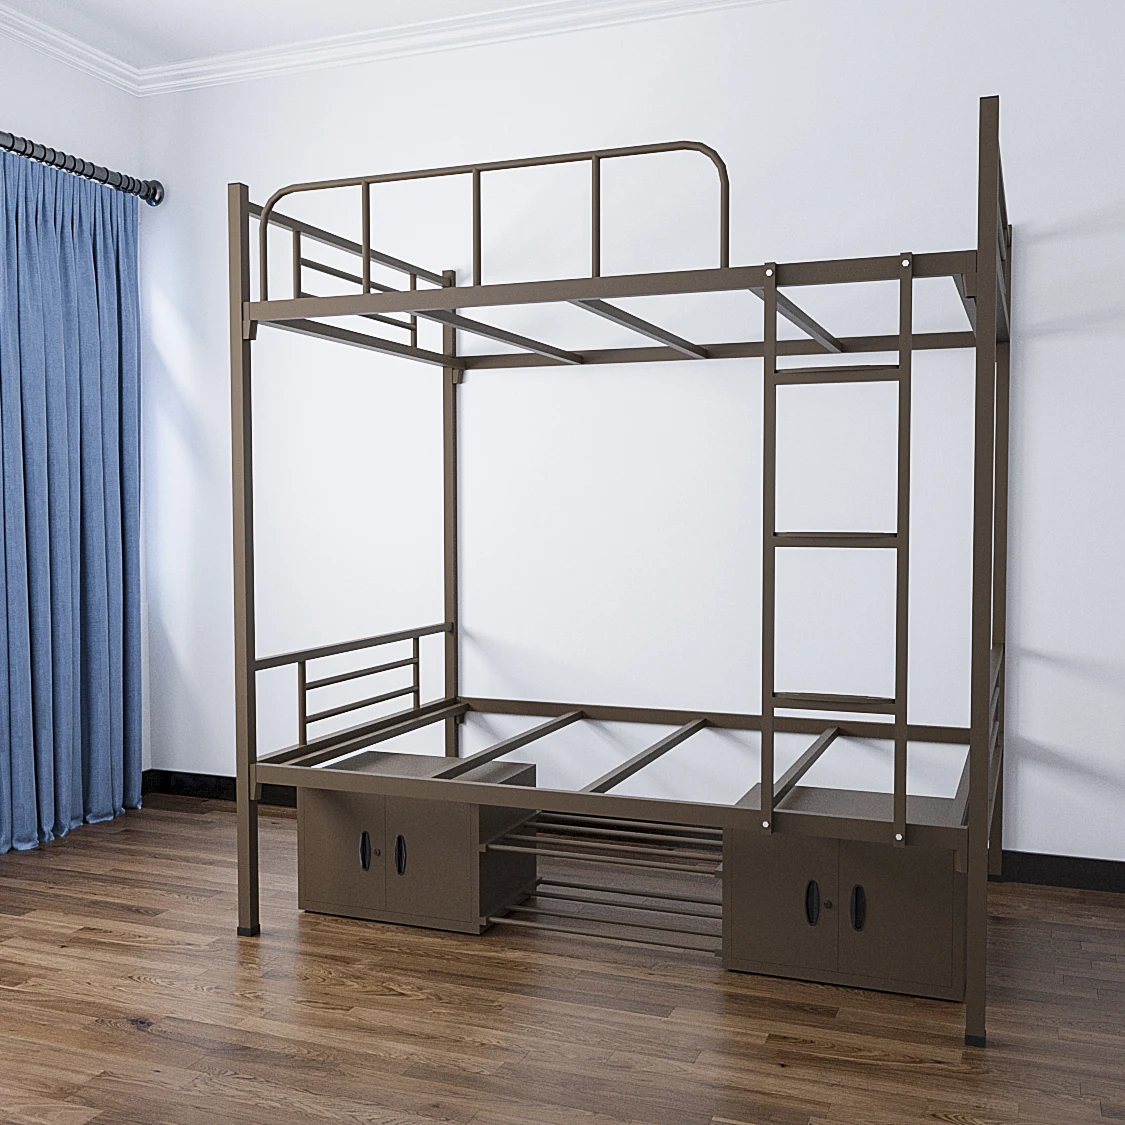 
High Quality Cheap Bunk Beds Double Students Frame Dormitory Apartment Metal Beds 